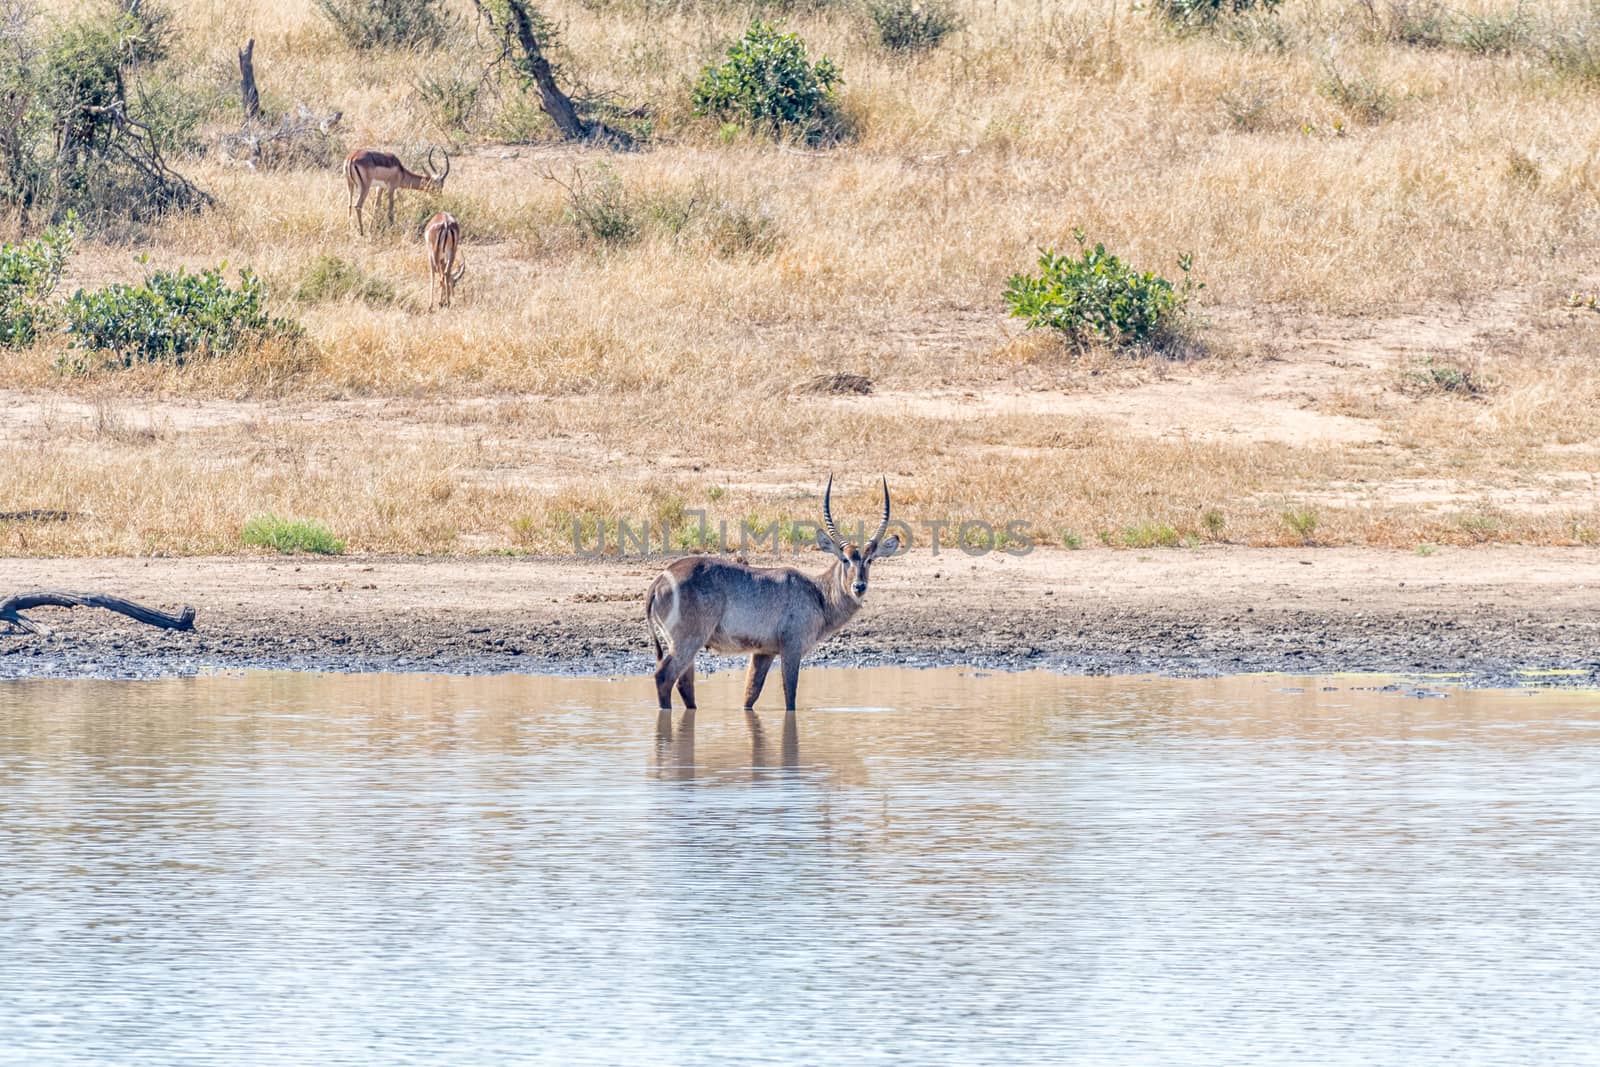 A male waterbuck, Kobus ellipsiprymnus, in a river. Impalas are visible